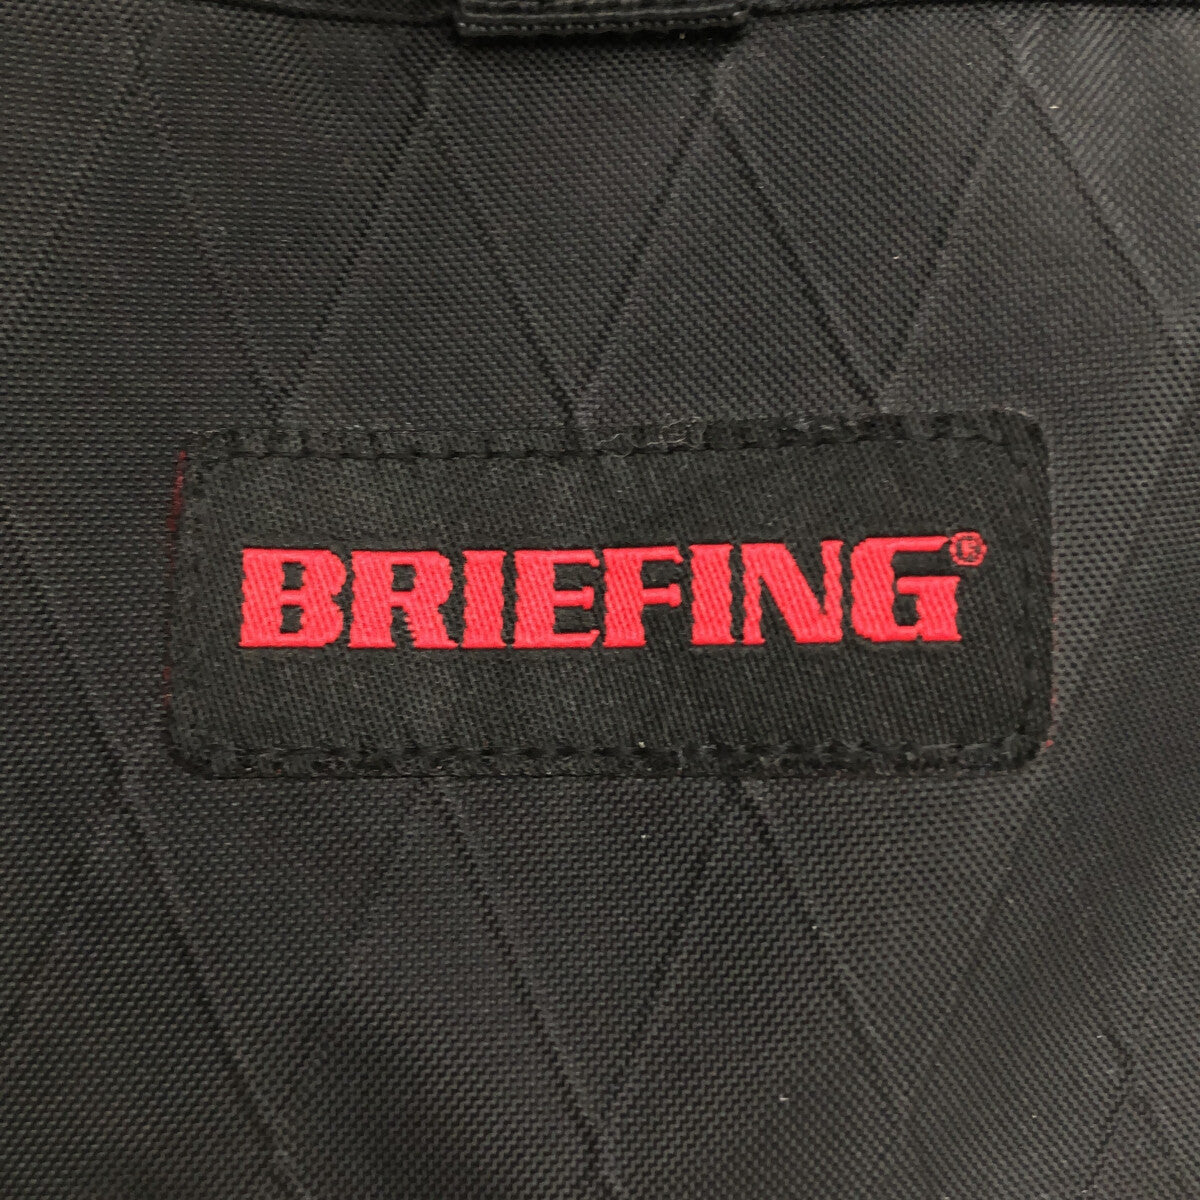 BRIEFING / ブリーフィング | TRANSITION SQUIRE XP / トランジション